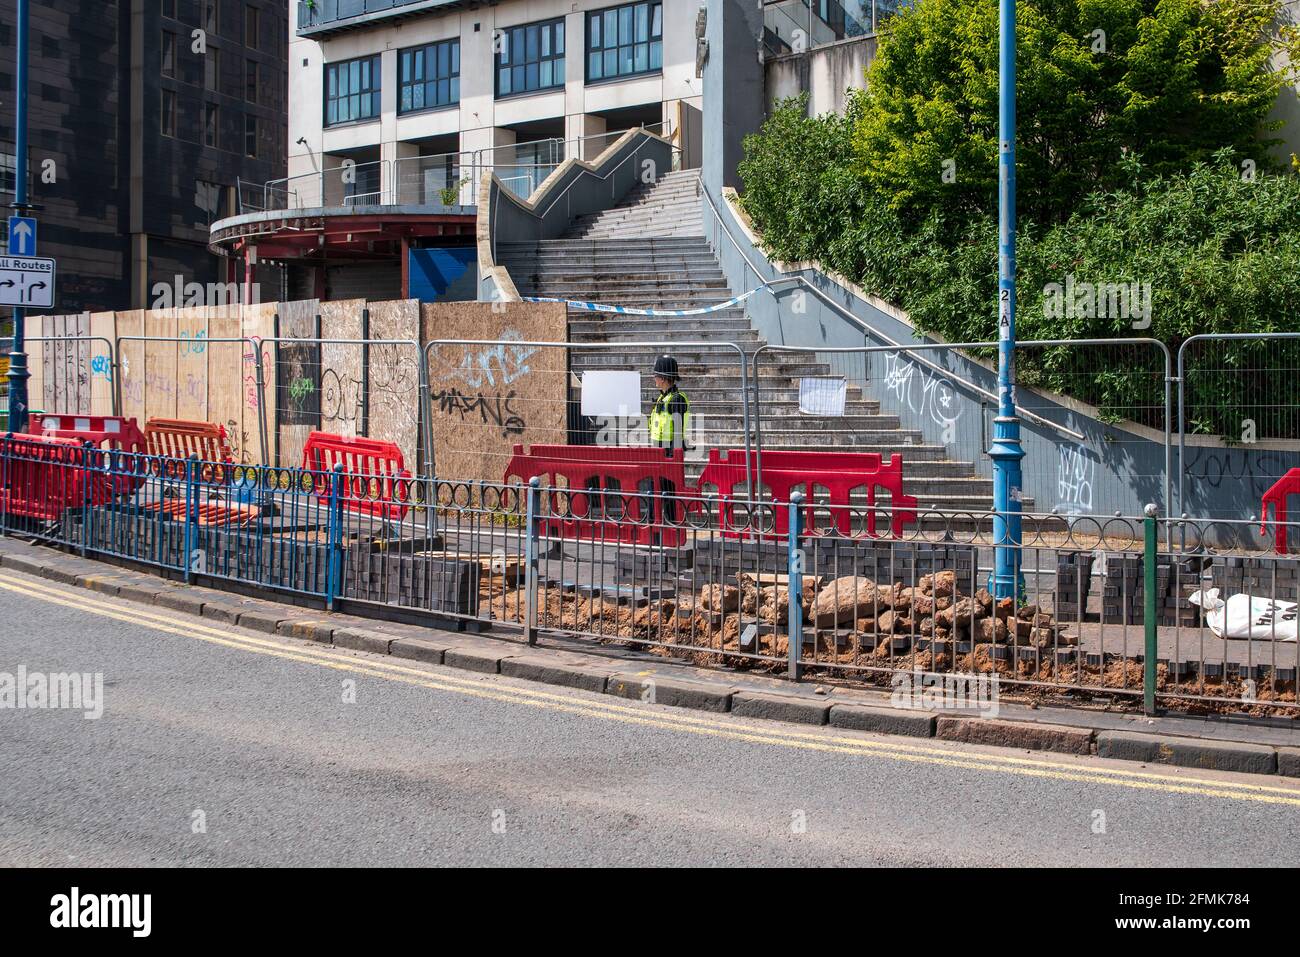 Birmingham, UK. 10th May 2021: West Midlands Police are investigating after human remains were discovered under a pavement by construction workers on Sunday morning (9th May 2021). Credit: Ryan Underwood / Alamy Live News Stock Photo